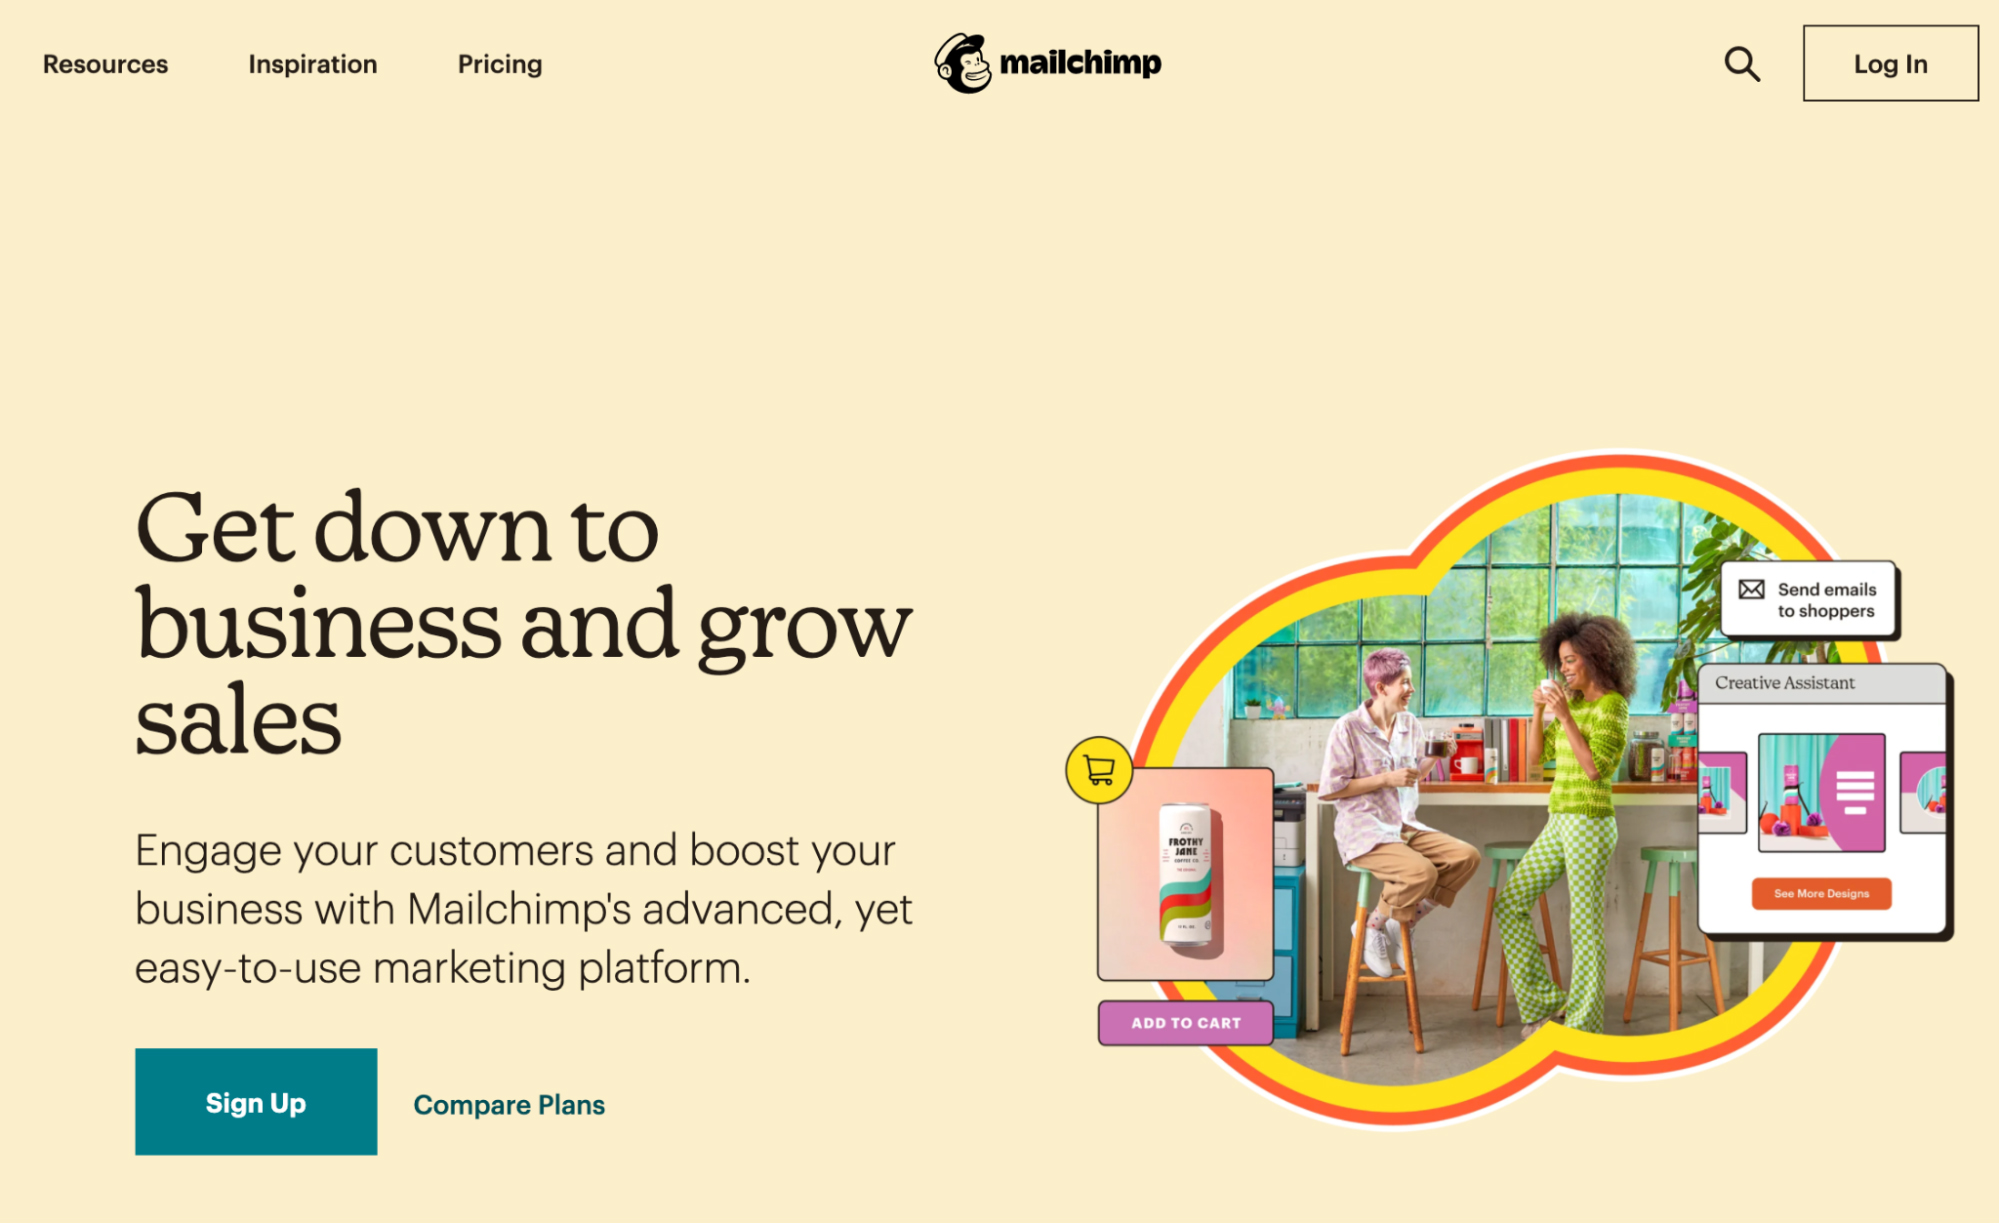 Mailchimp’s new homepage outlining the new positioning.